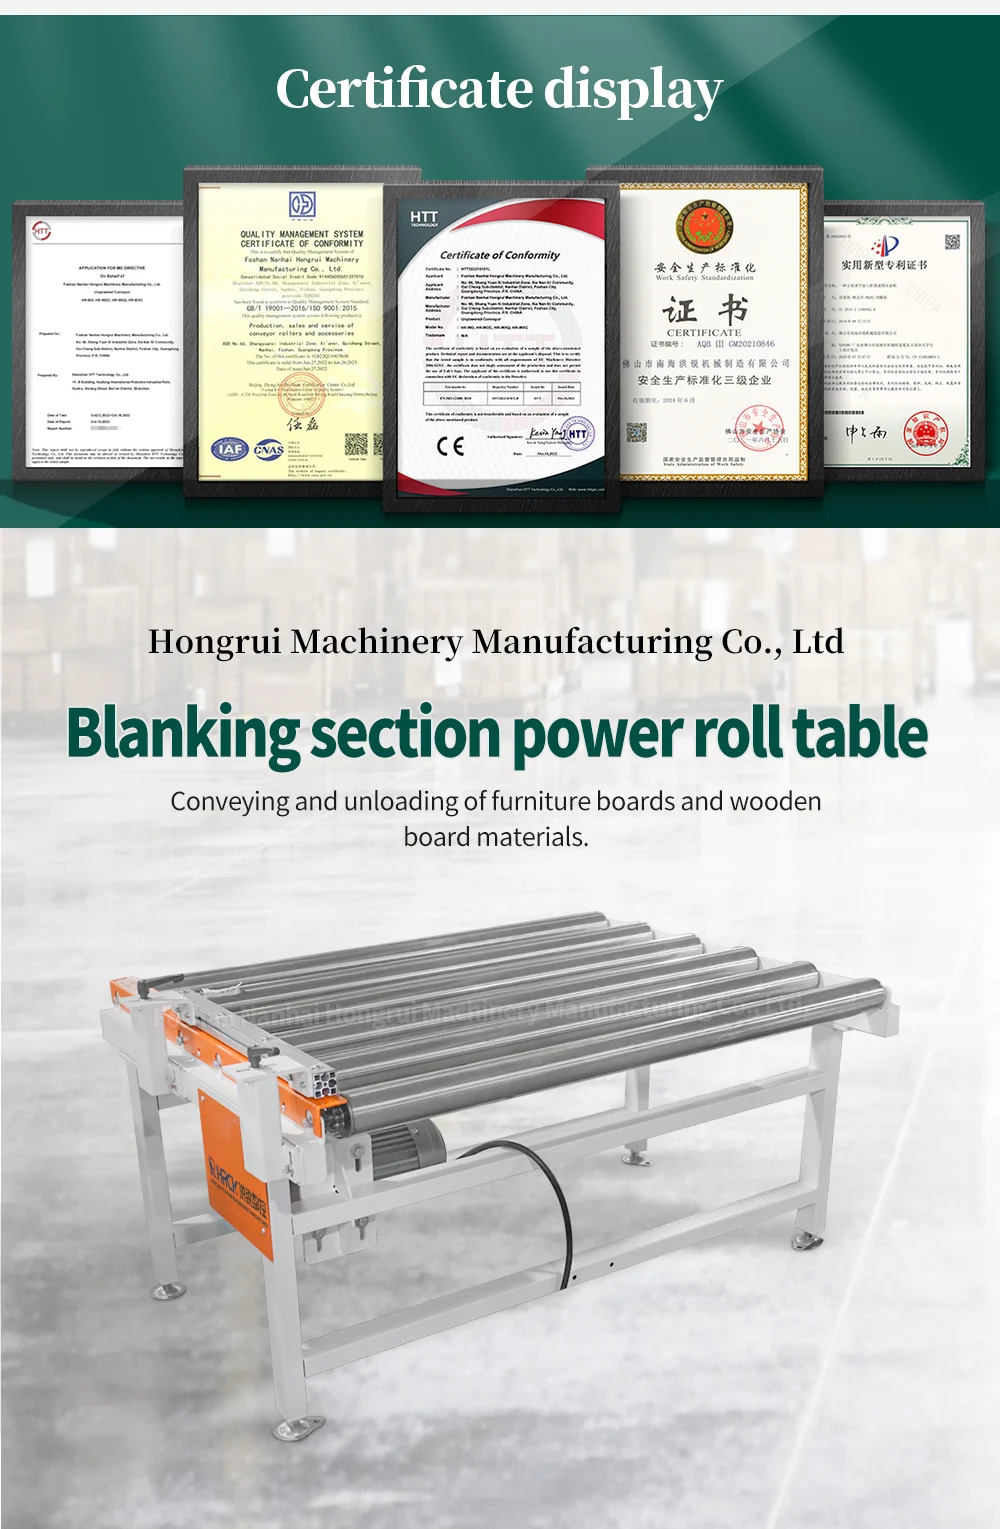 Enhance Workplace Safety: Sensor-Equipped Power Rollers for Peace of Mind details